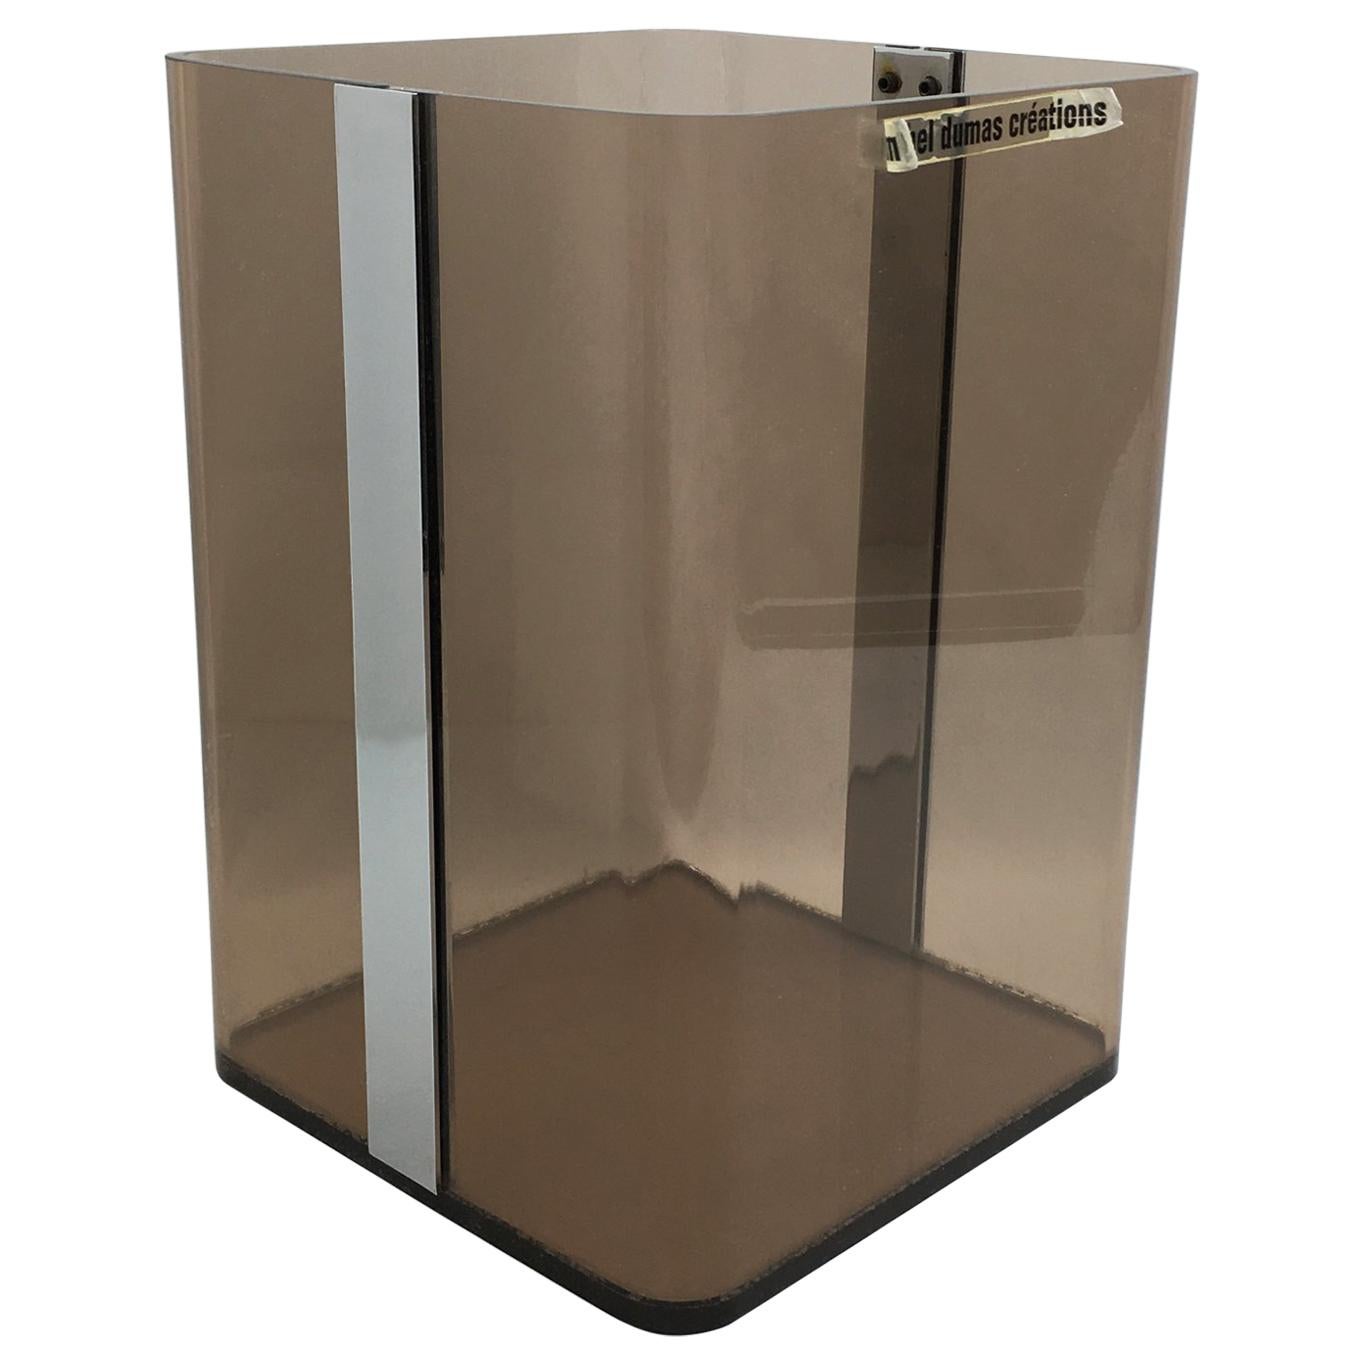 Michel Dumas for Roche Bobois 1970s Smoked Lucite and Chrome Paper Waste Basket